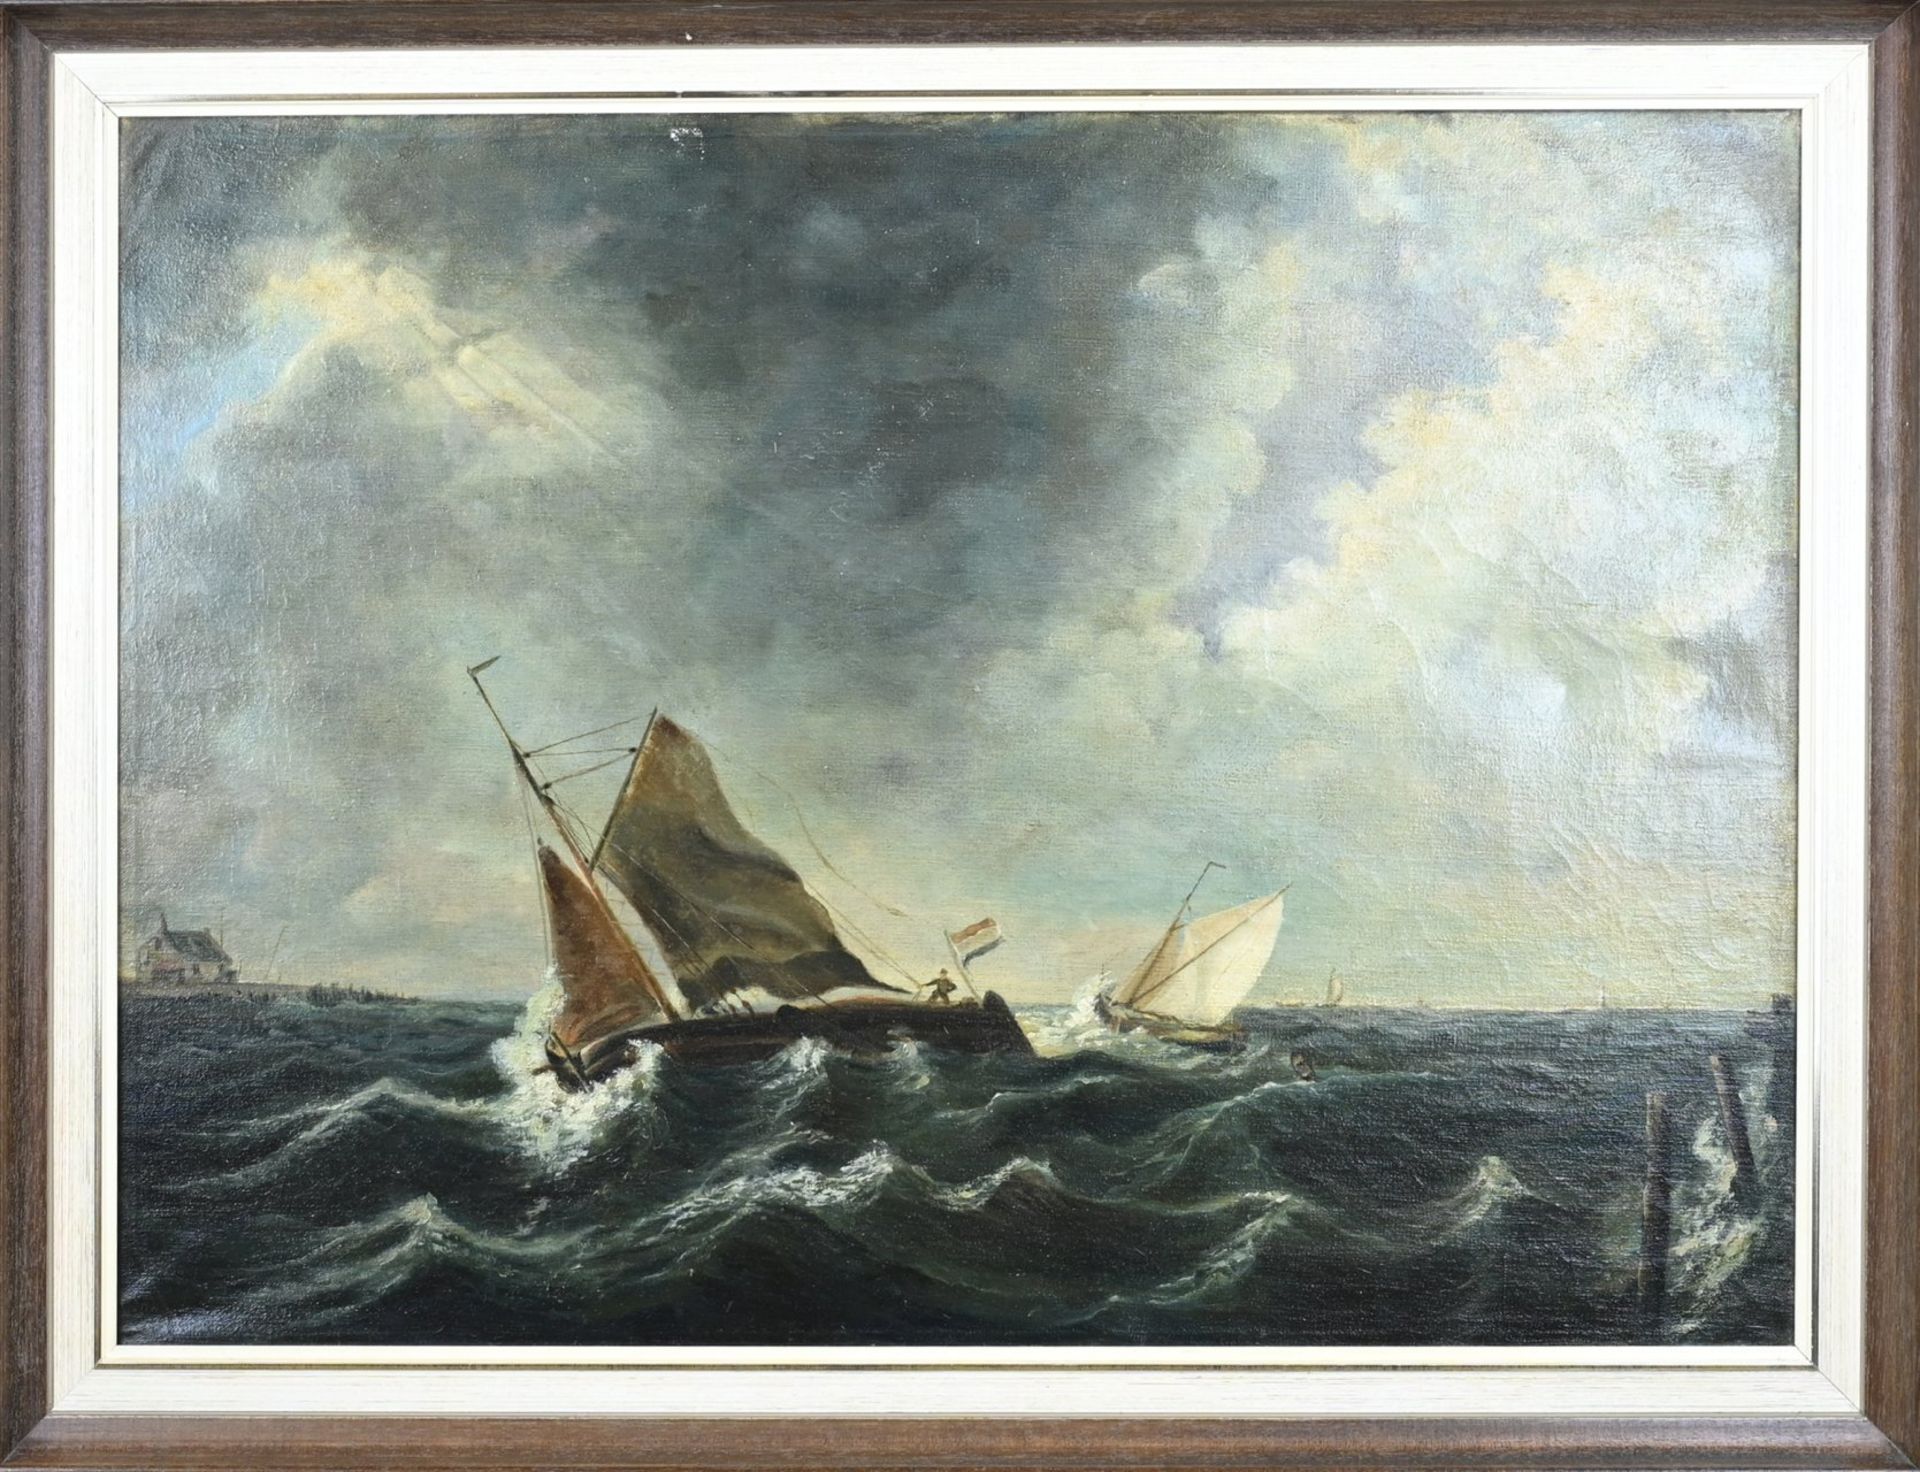 Unsigned, Sailboats on rough seas